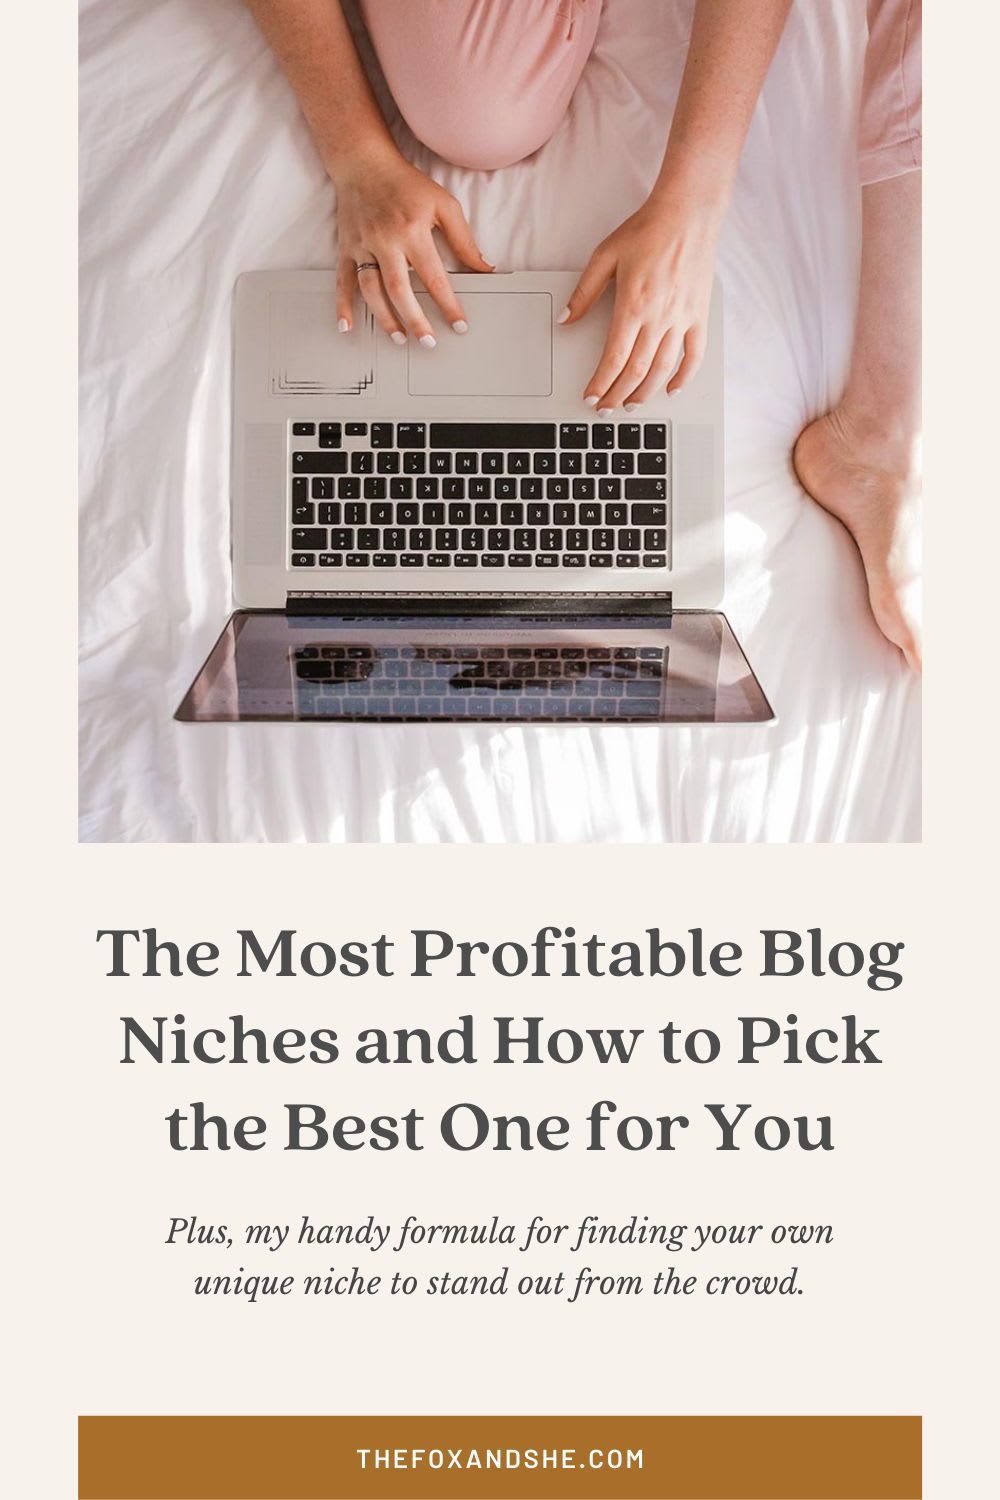 How & Why to Pick a Profitable Blog Niche